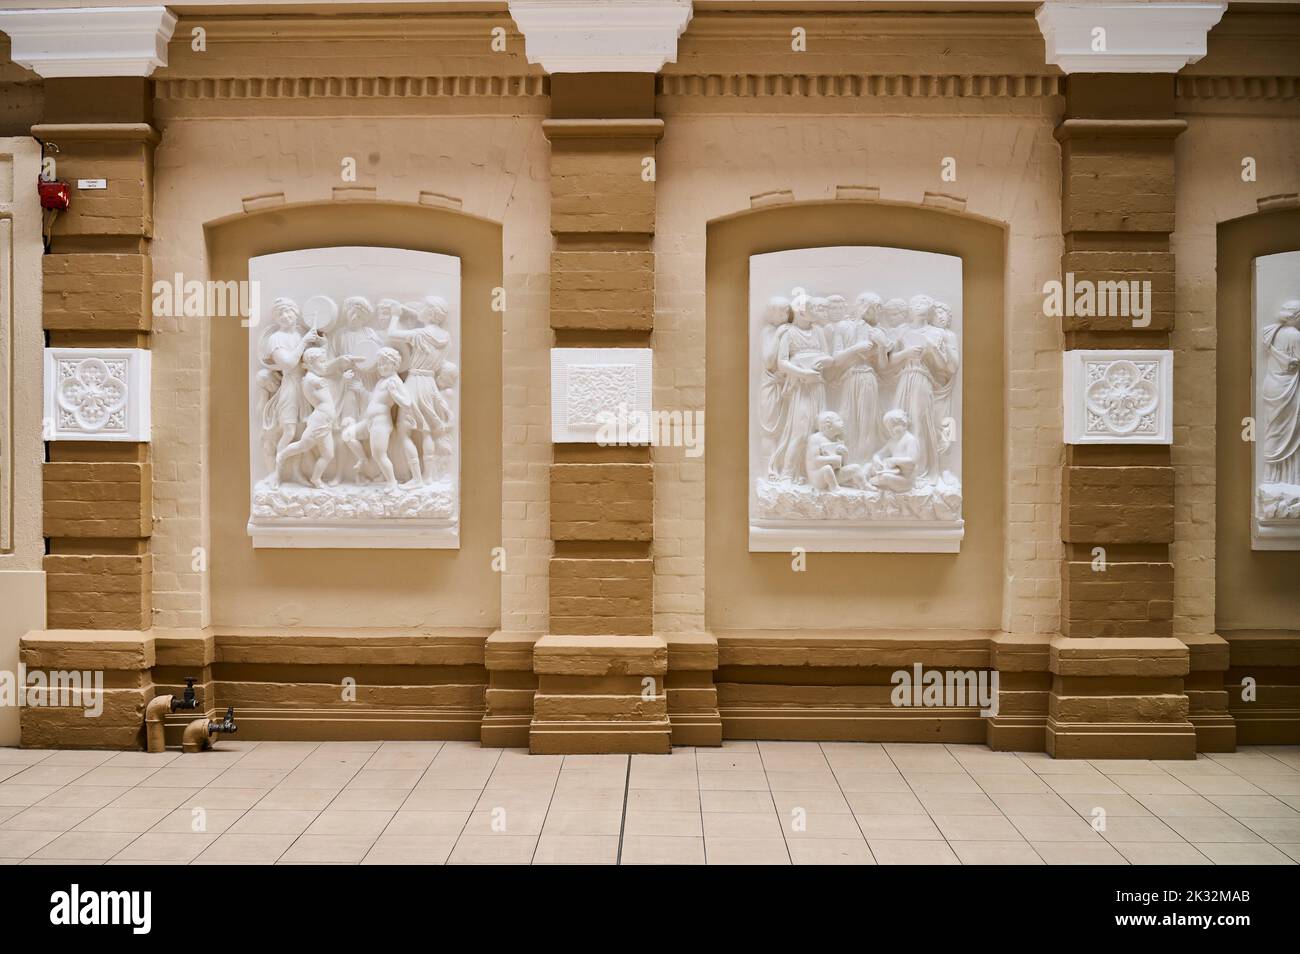 Entertainment theamed bas-relief on the walls of the Winter gardens,Blackpool,uk Stock Photo